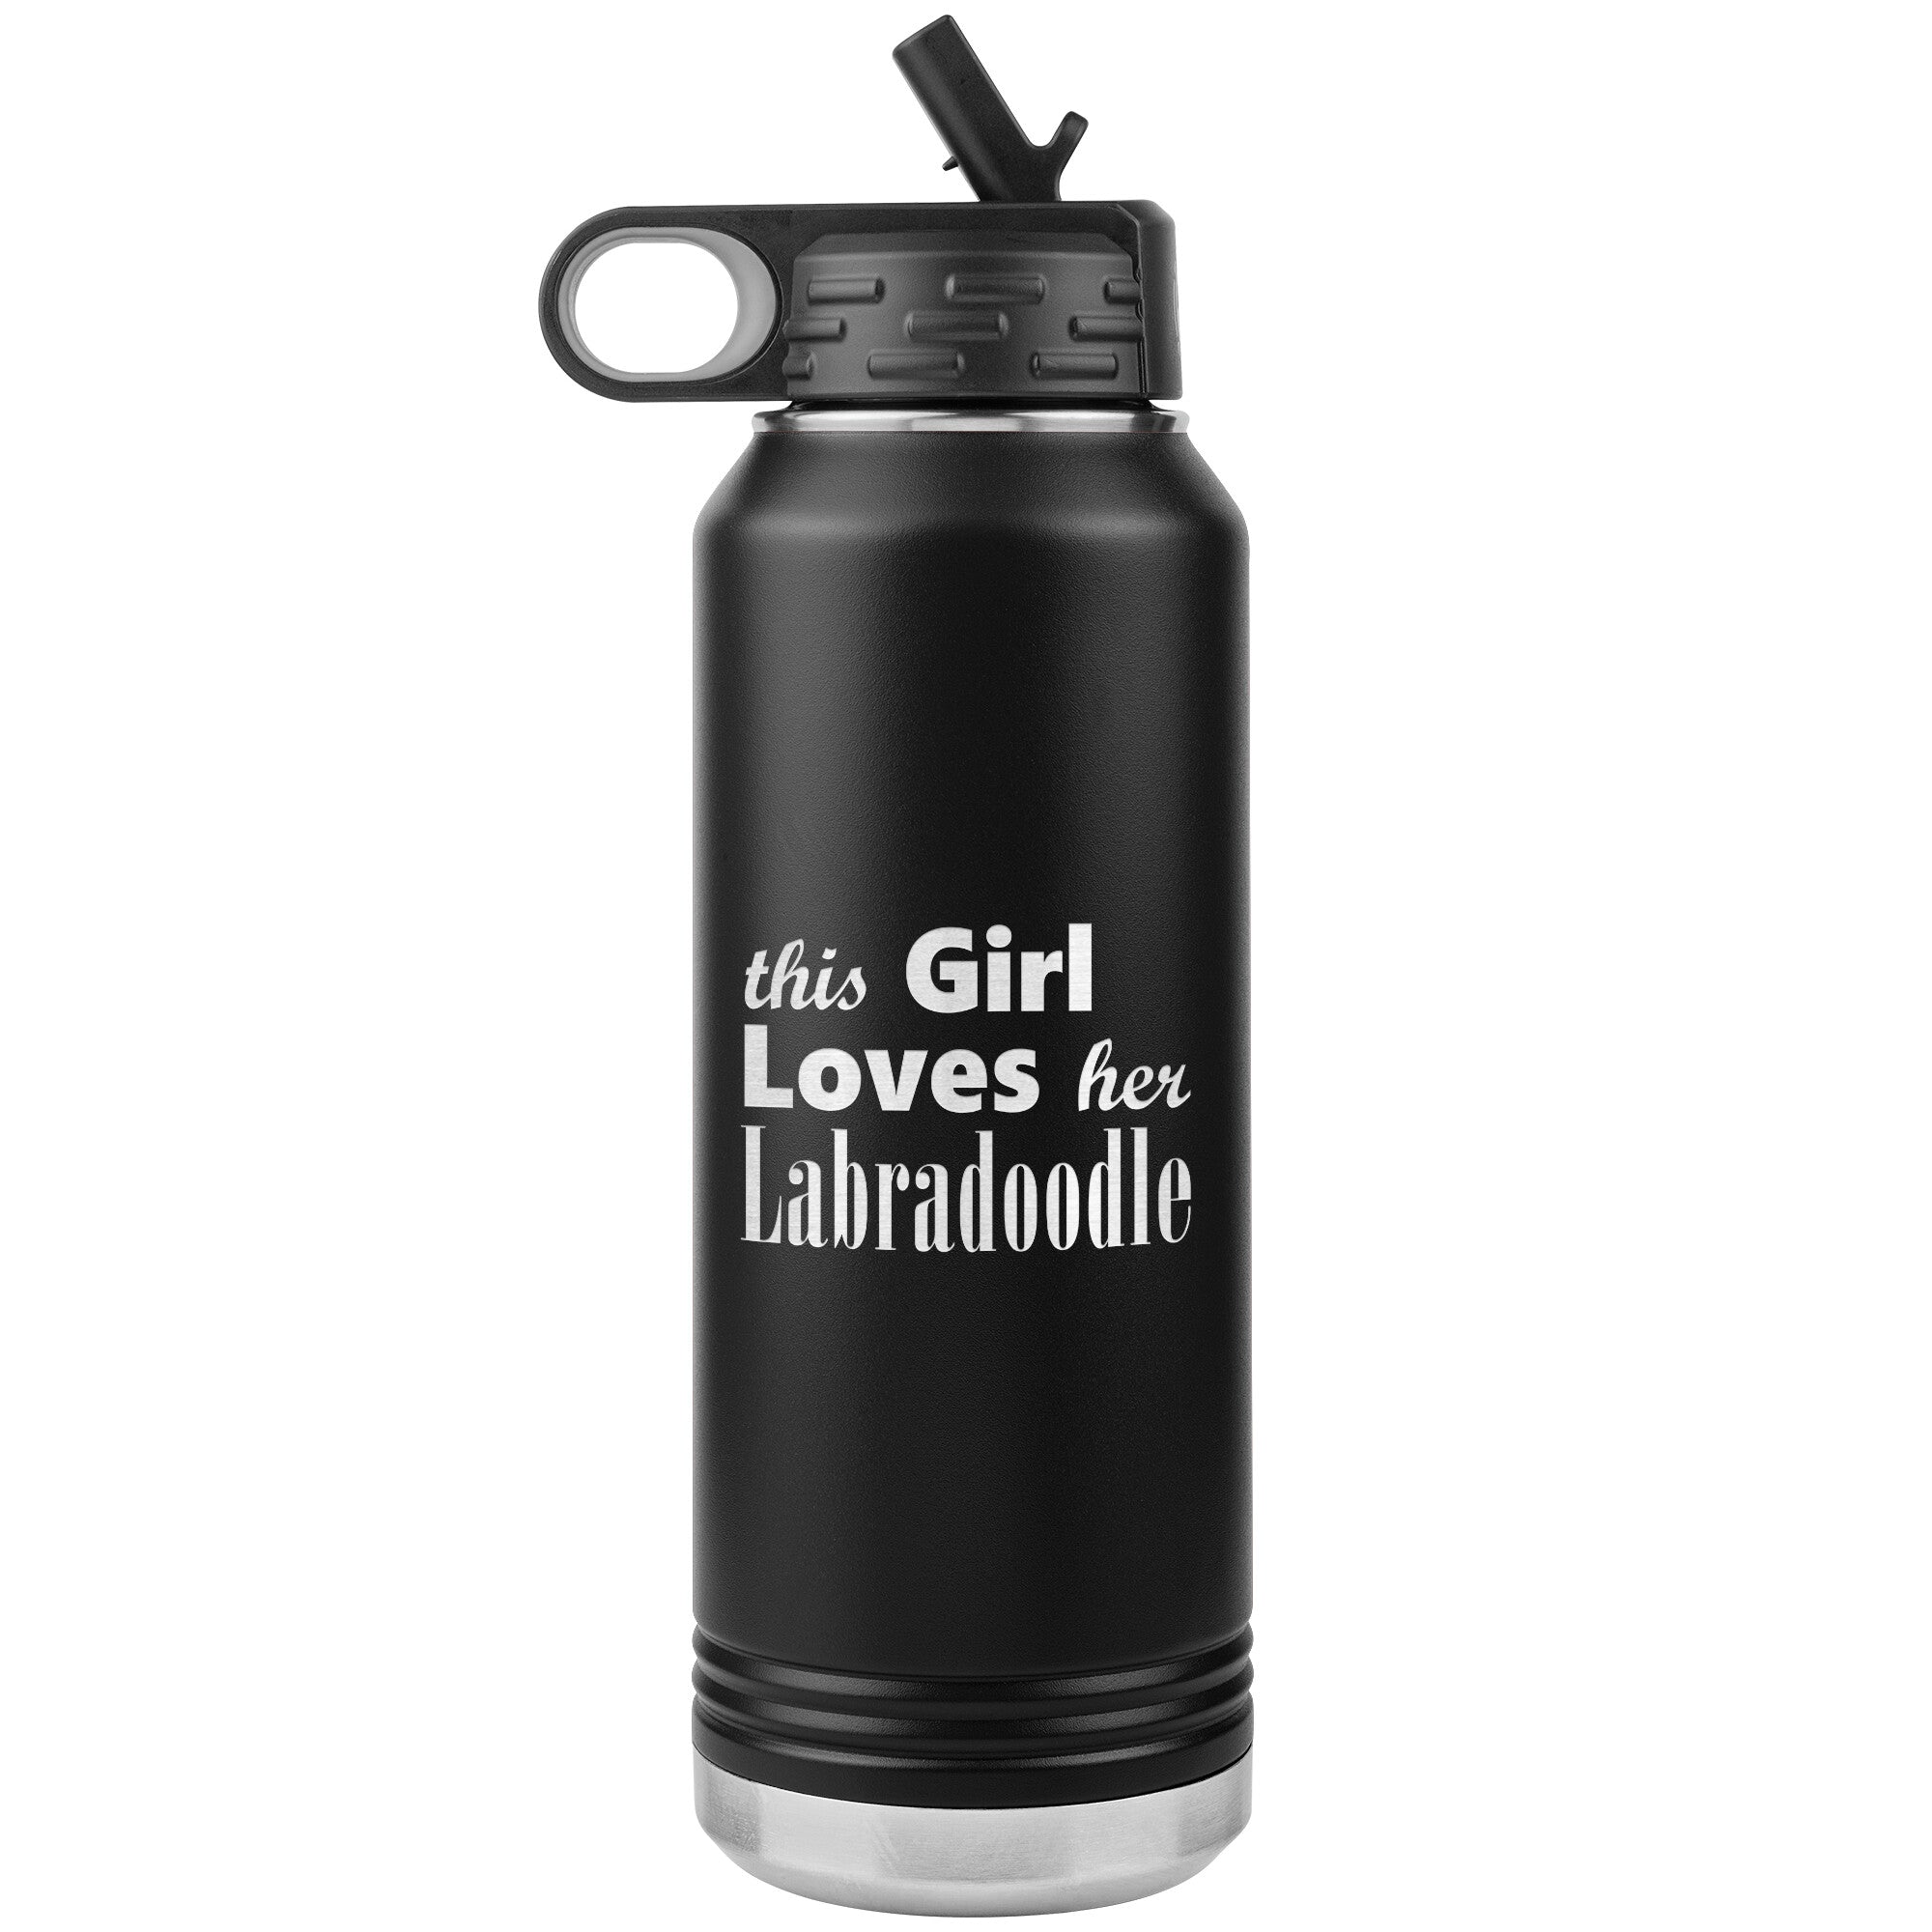 Labradoodle - 32oz Insulated Water Bottle